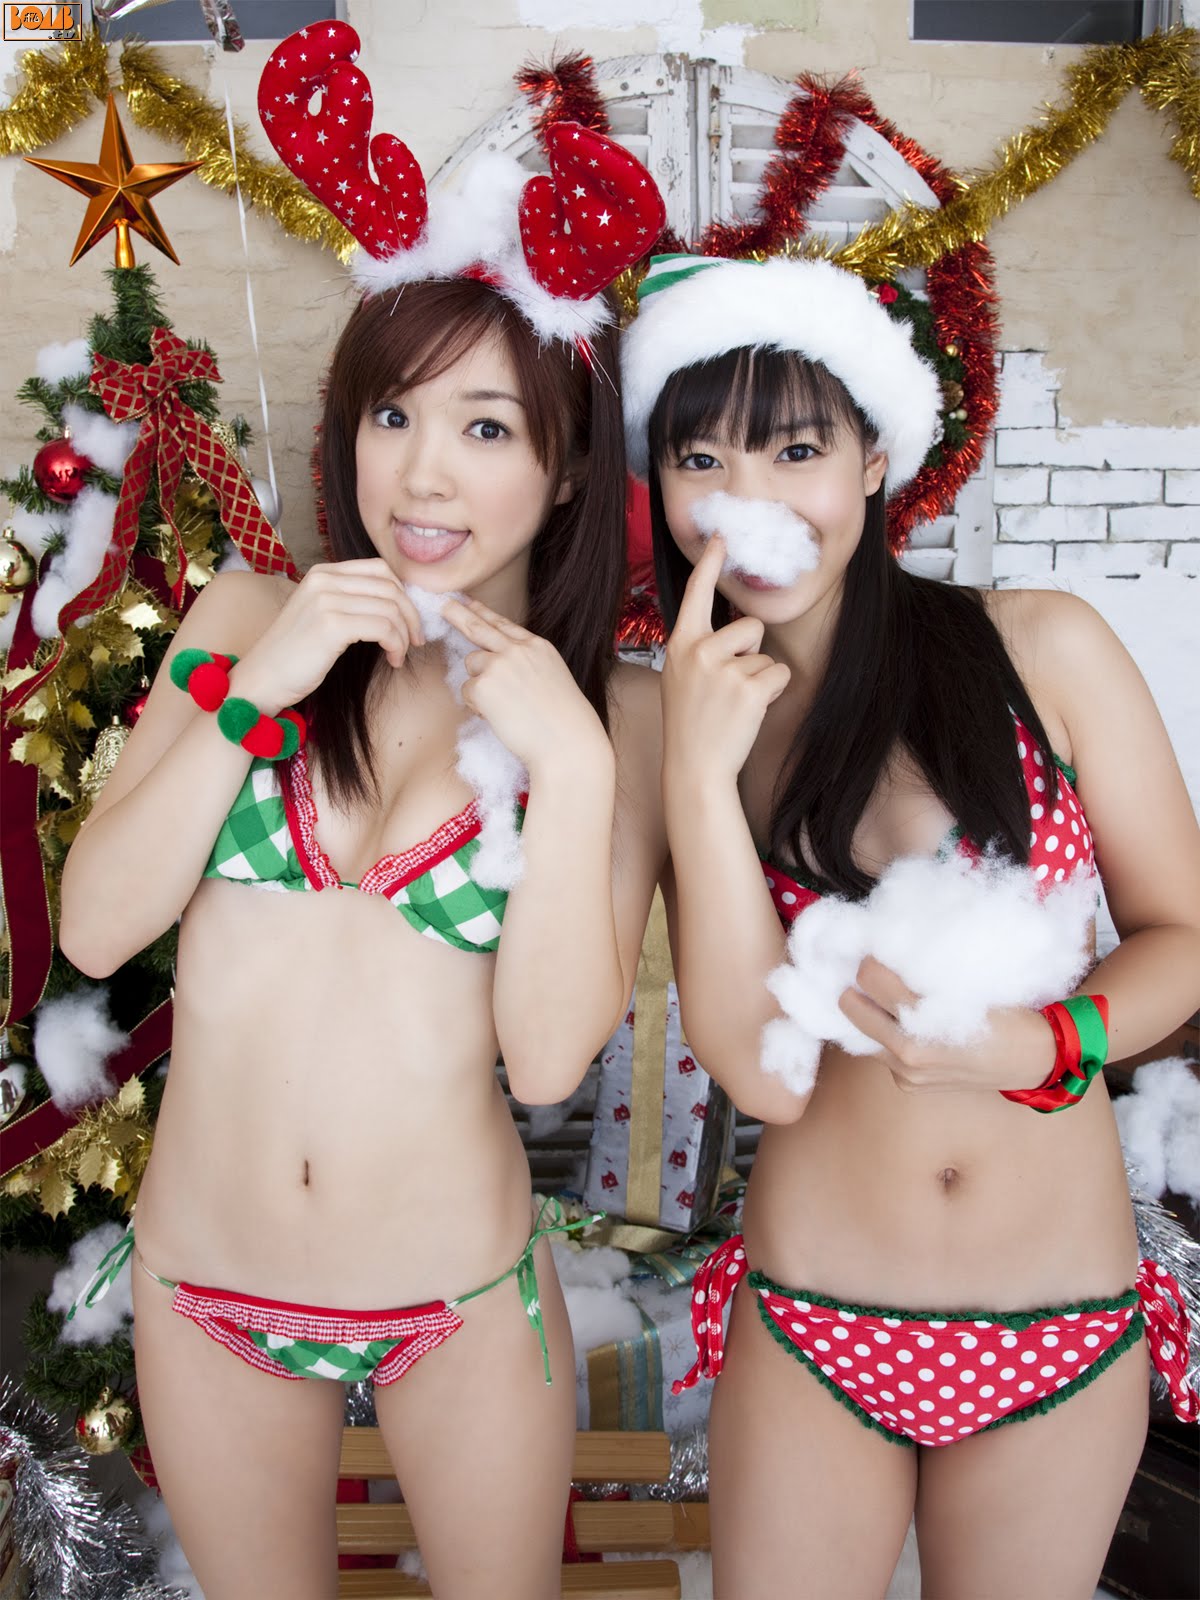 Mery X'mas from Japan girl pic.